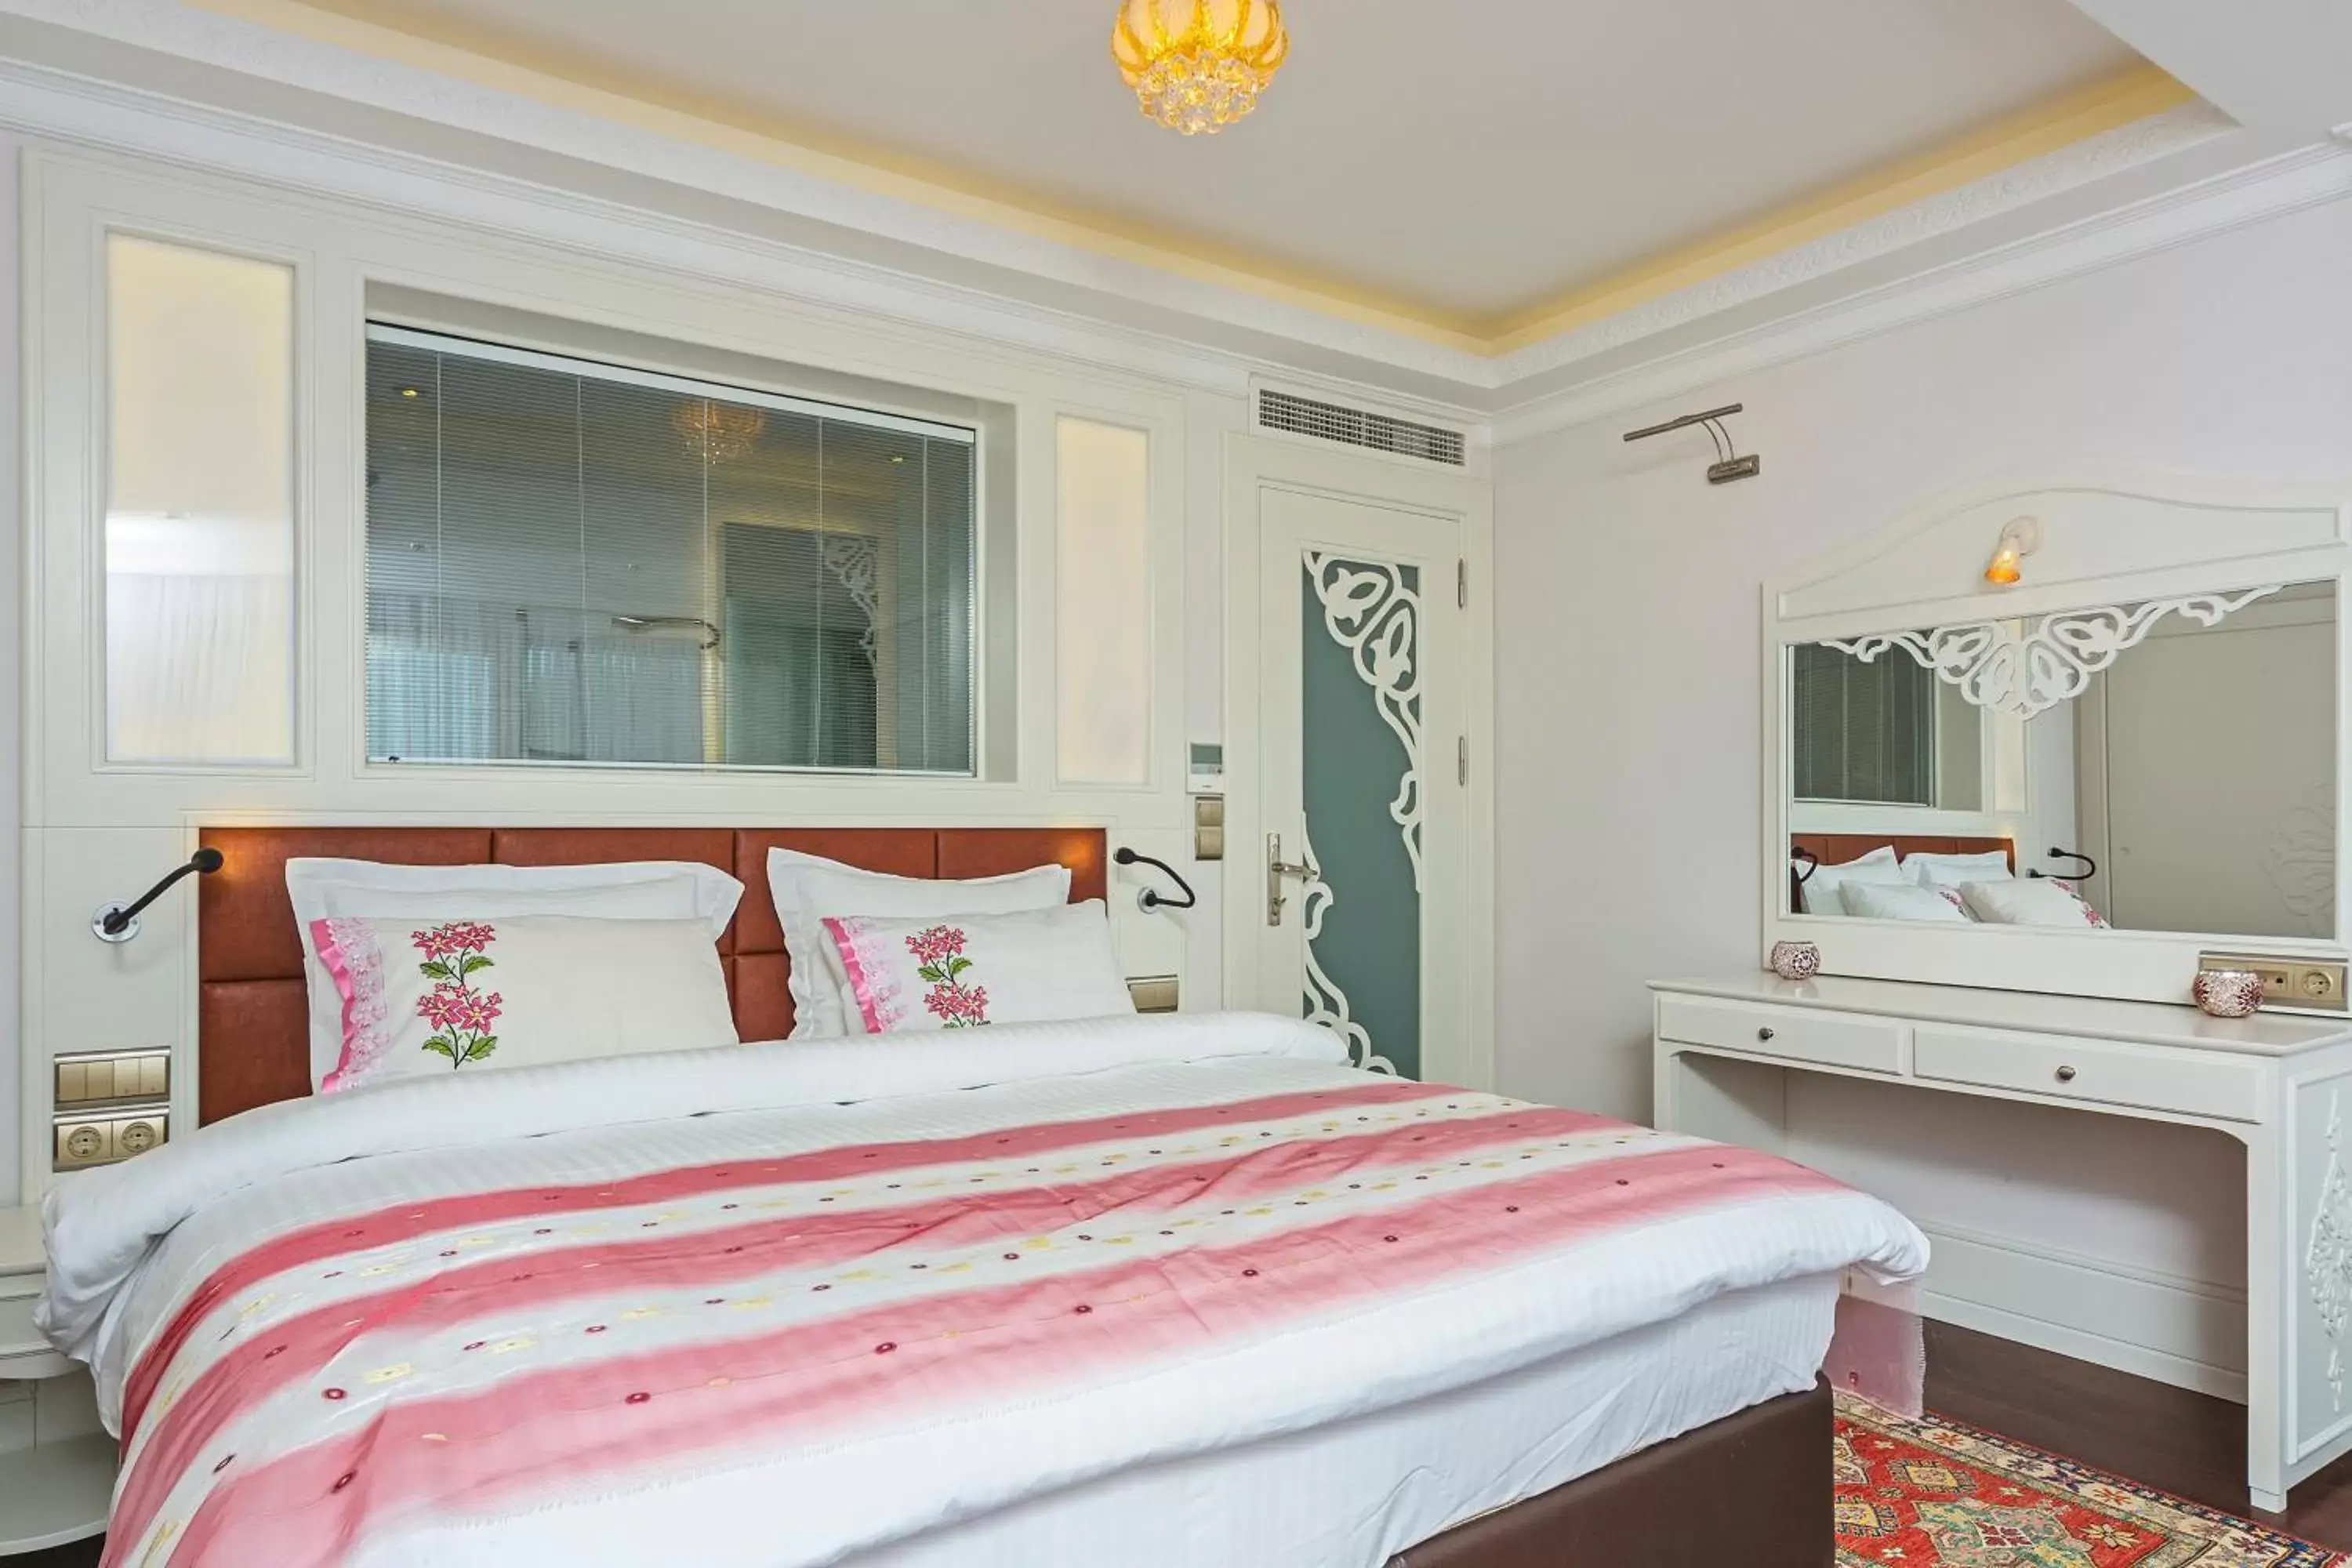 Luxury One-Bedroom Apartment with Garden "Annex" in Ada Hotel Istanbul